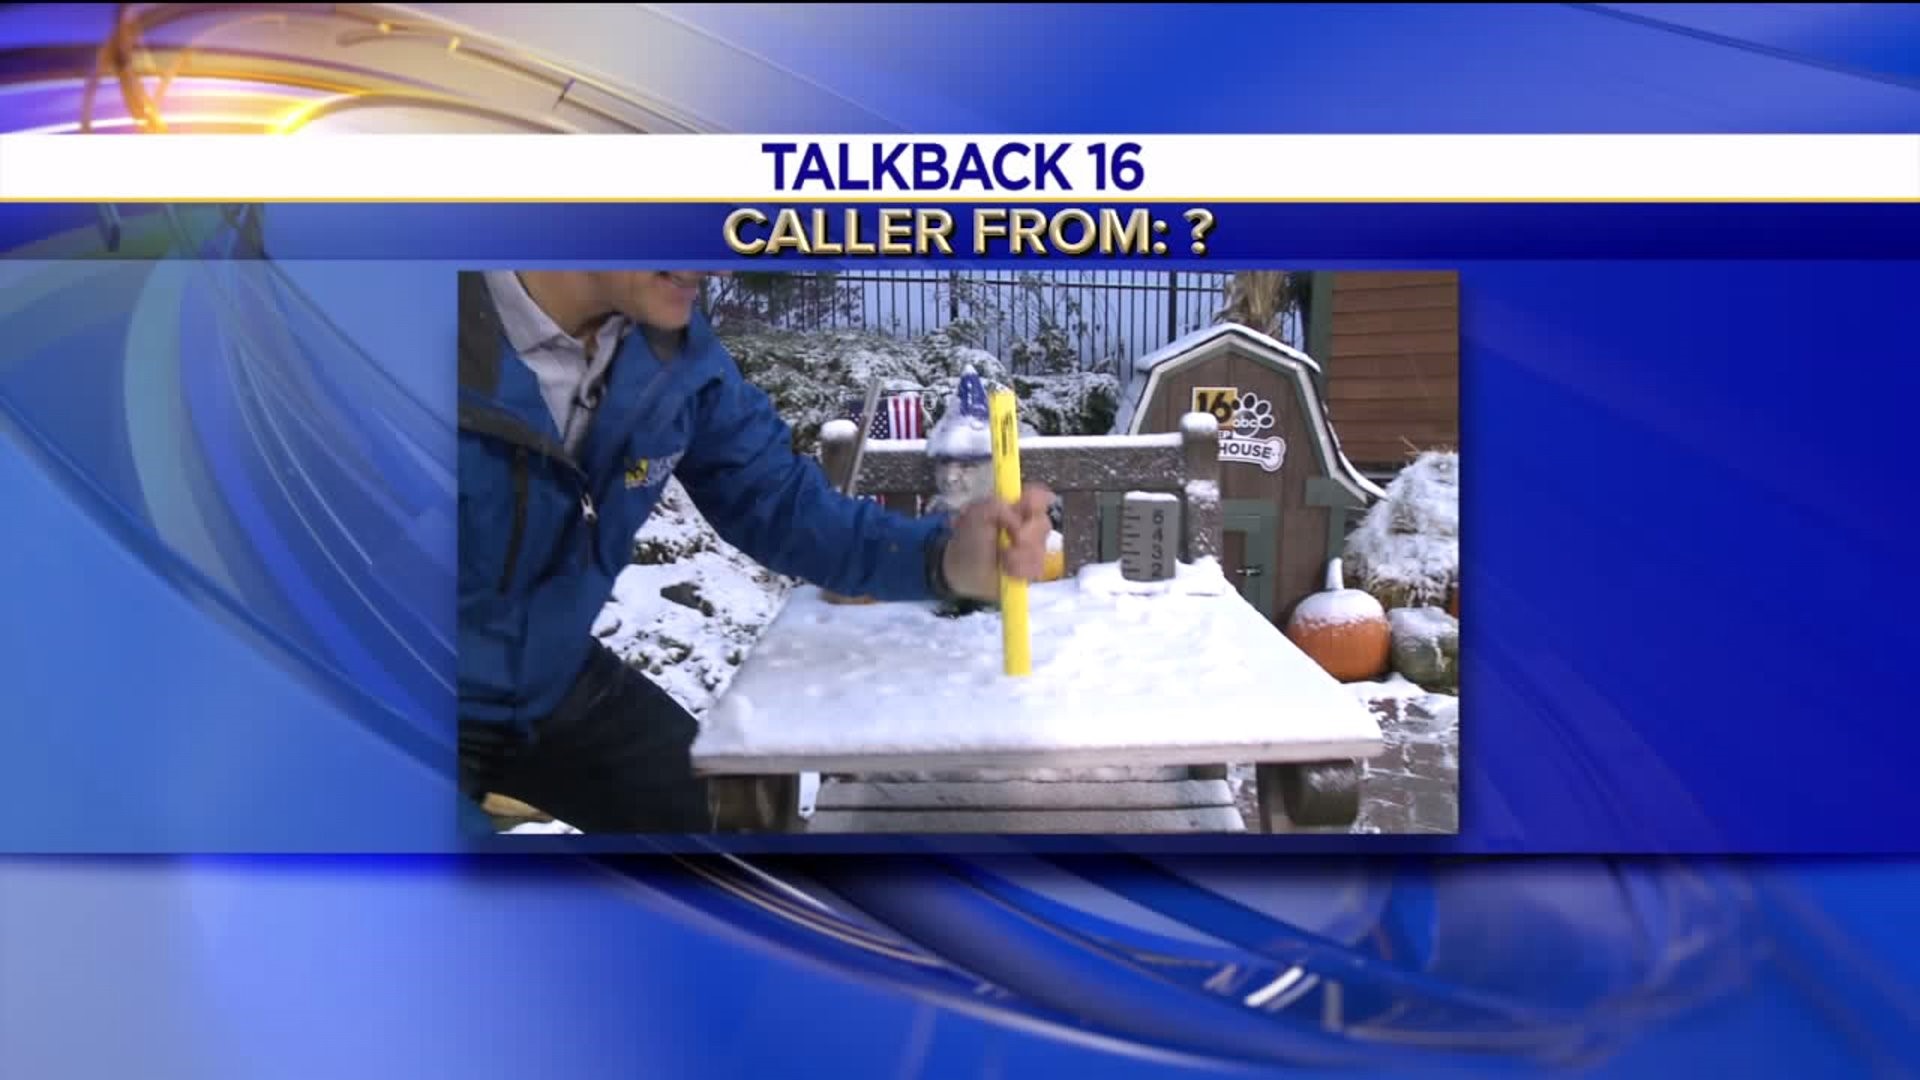 Talkback 16: A Special Christmas Tree, Ranger, and More Snowthrower Calls